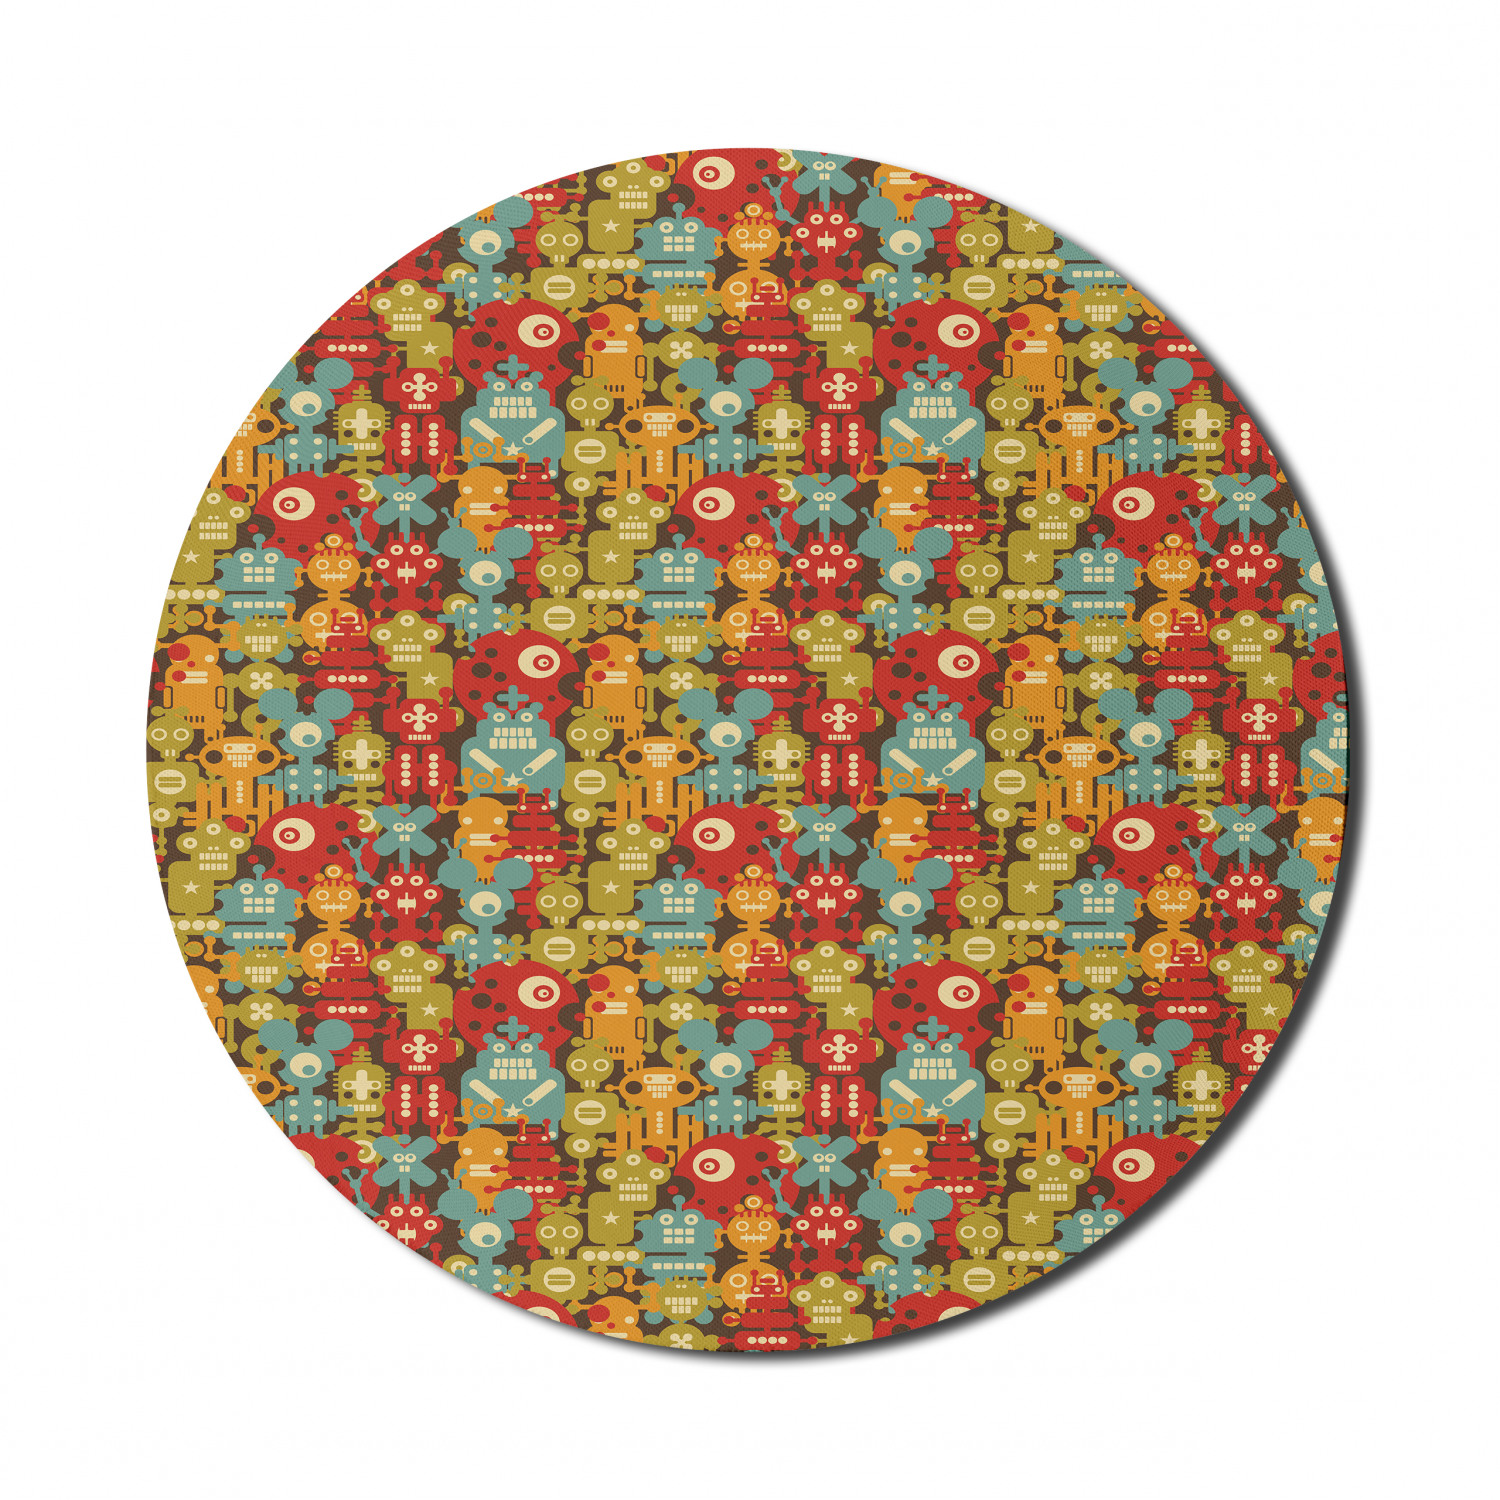 Cartoon Mouse Pad for Computers, Colorful Robot Monsters Sci Fi Style Retro Game Cyborg Fantasy Alien Pattern, Round Non-Slip Thick Rubber Modern Gaming Mousepad, 8" Round, Multicolor, by Ambesonne - image 1 of 2